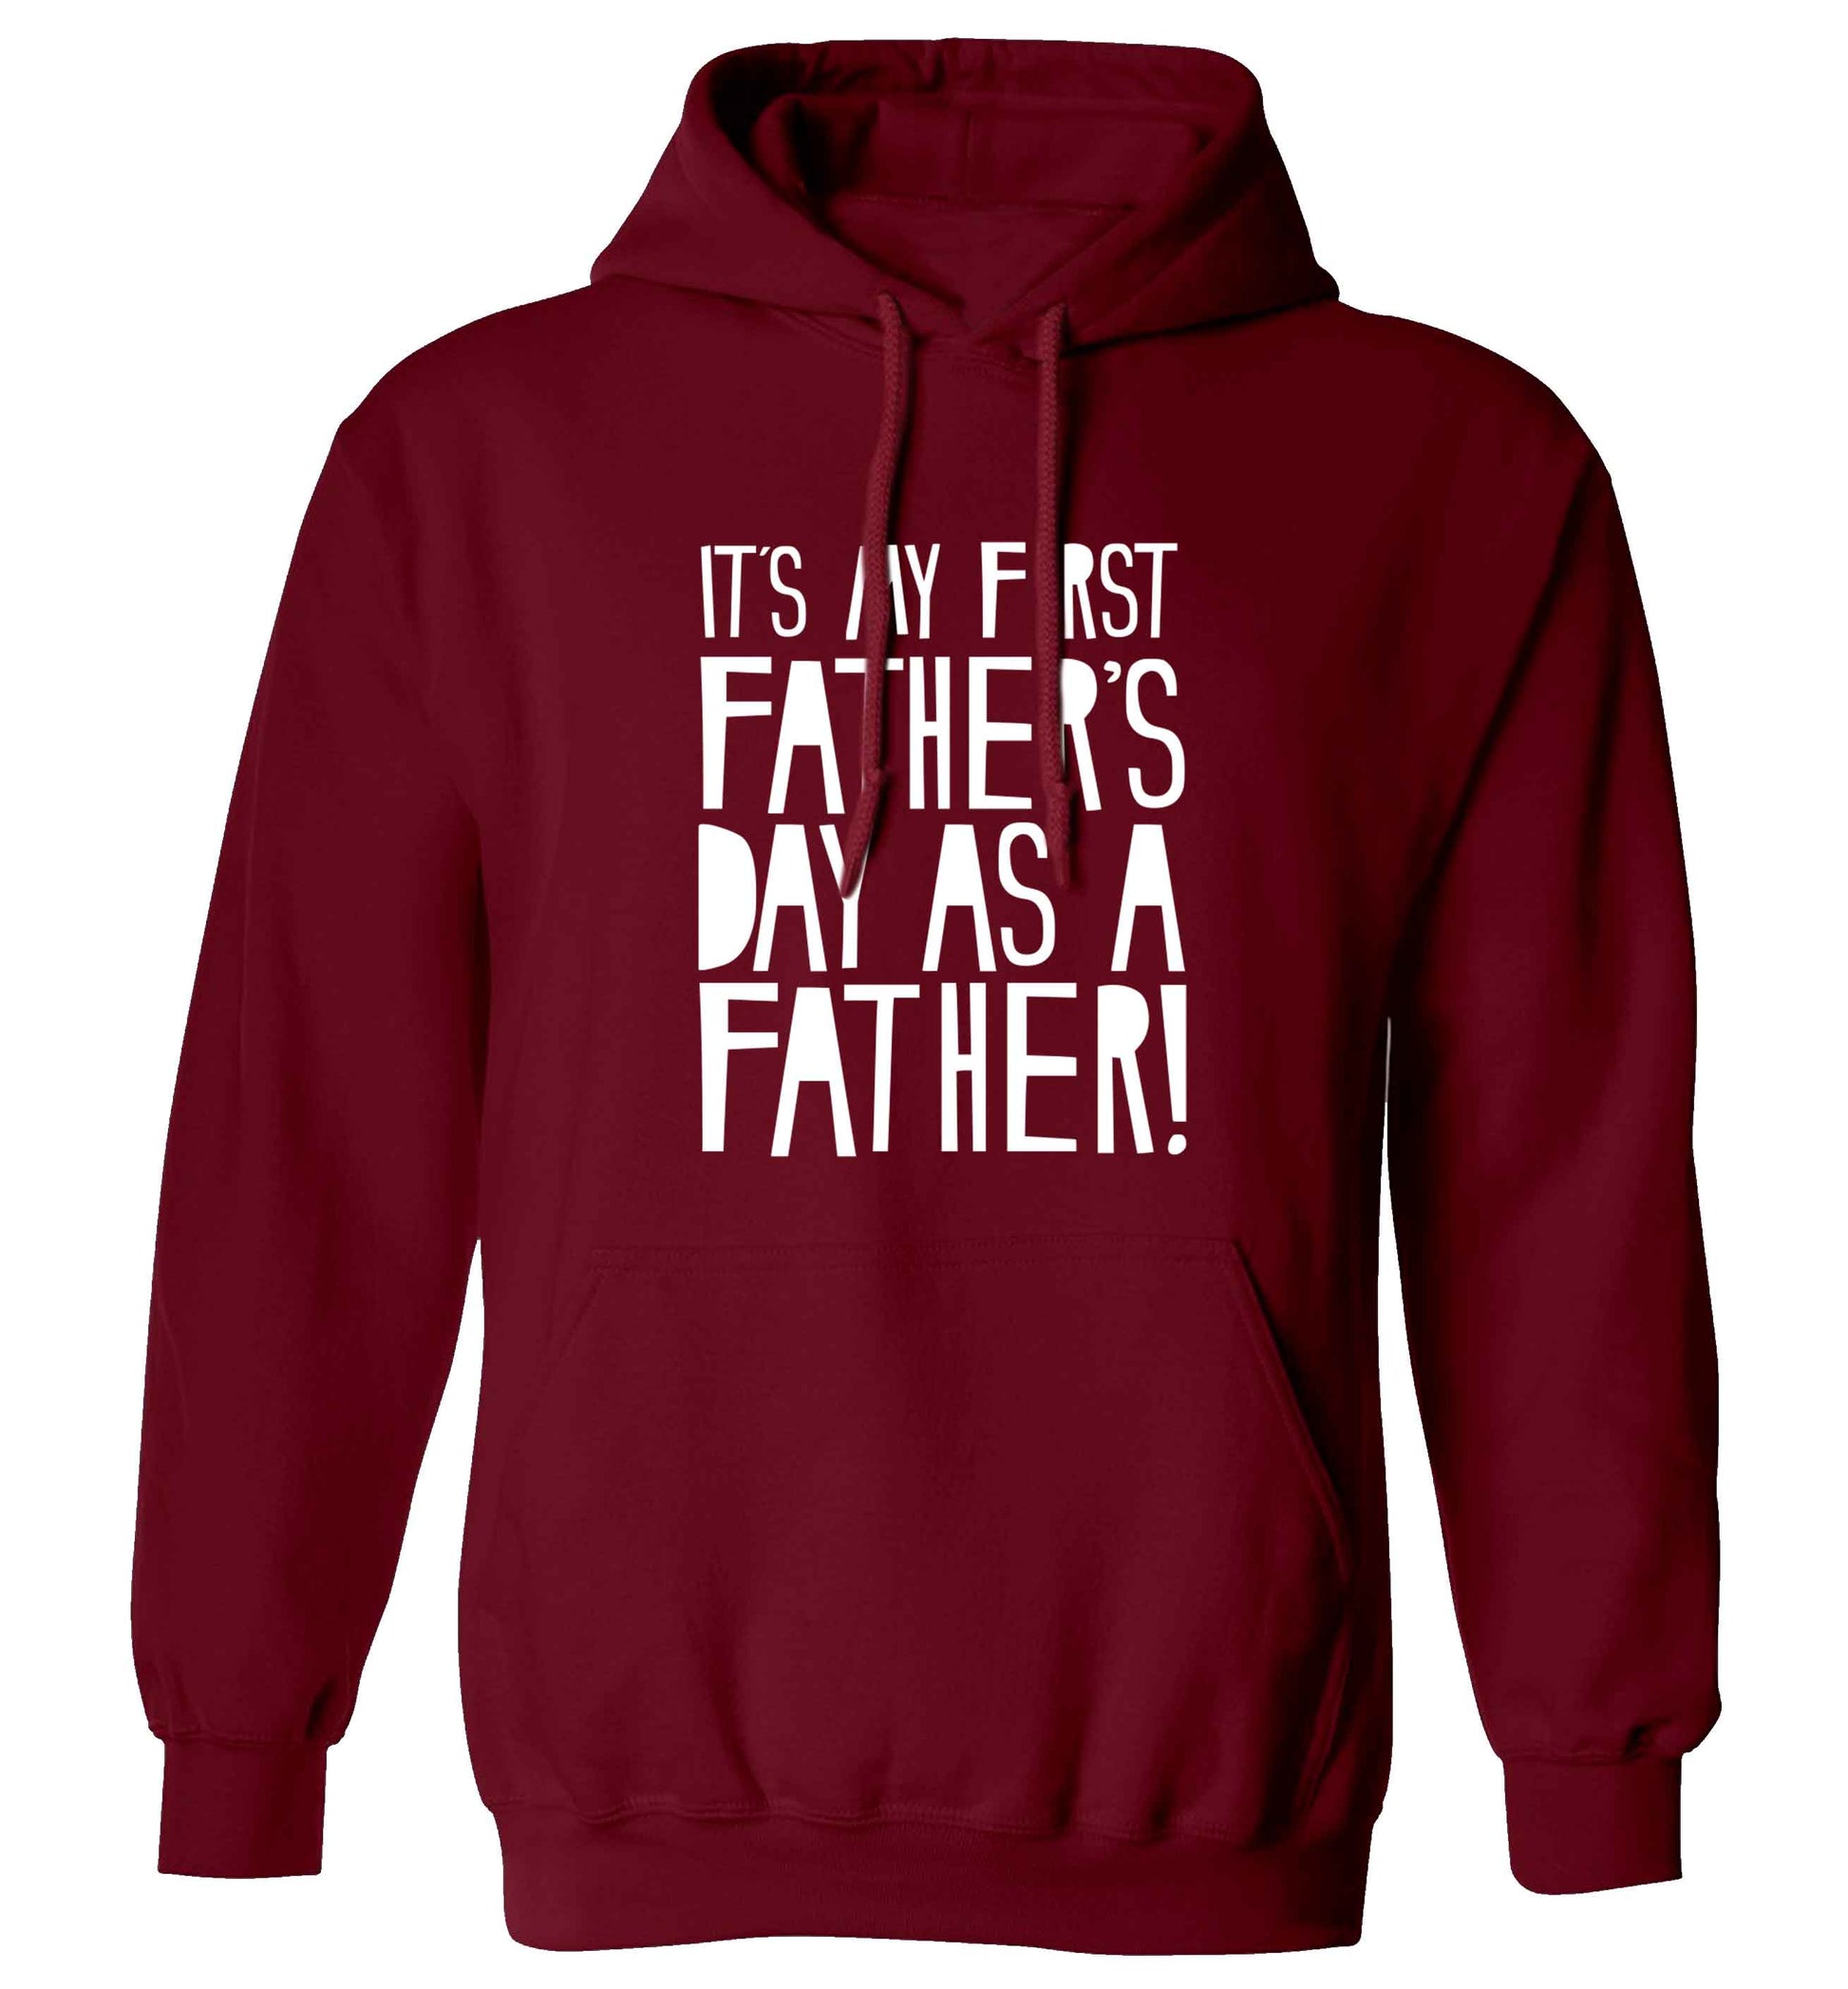 It's my first father's day as a father! adults unisex maroon hoodie 2XL